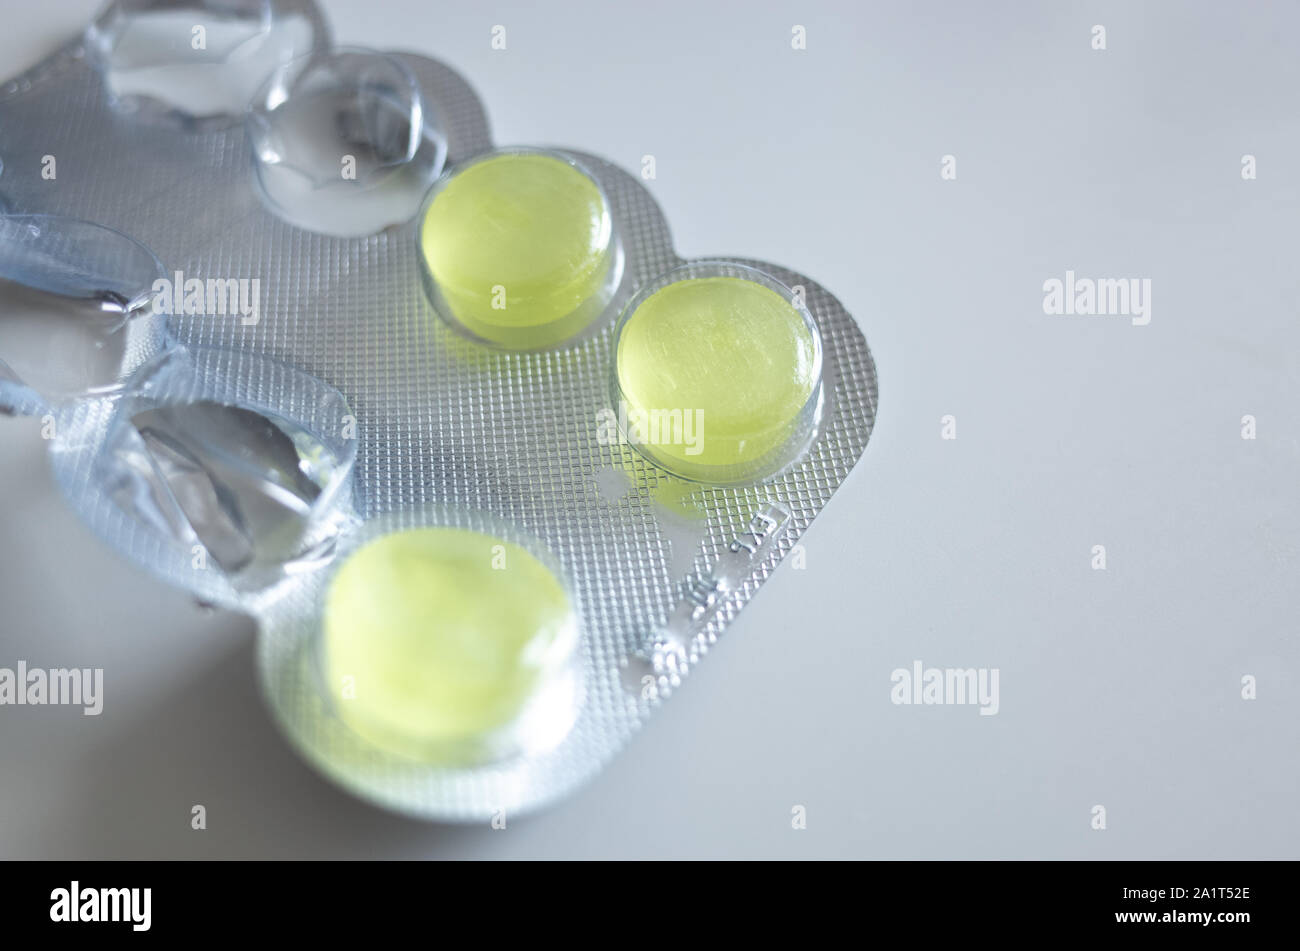 Close up of some medicine tablets/throat lozenges in a blister pack. Copy space for text. Stock Photo